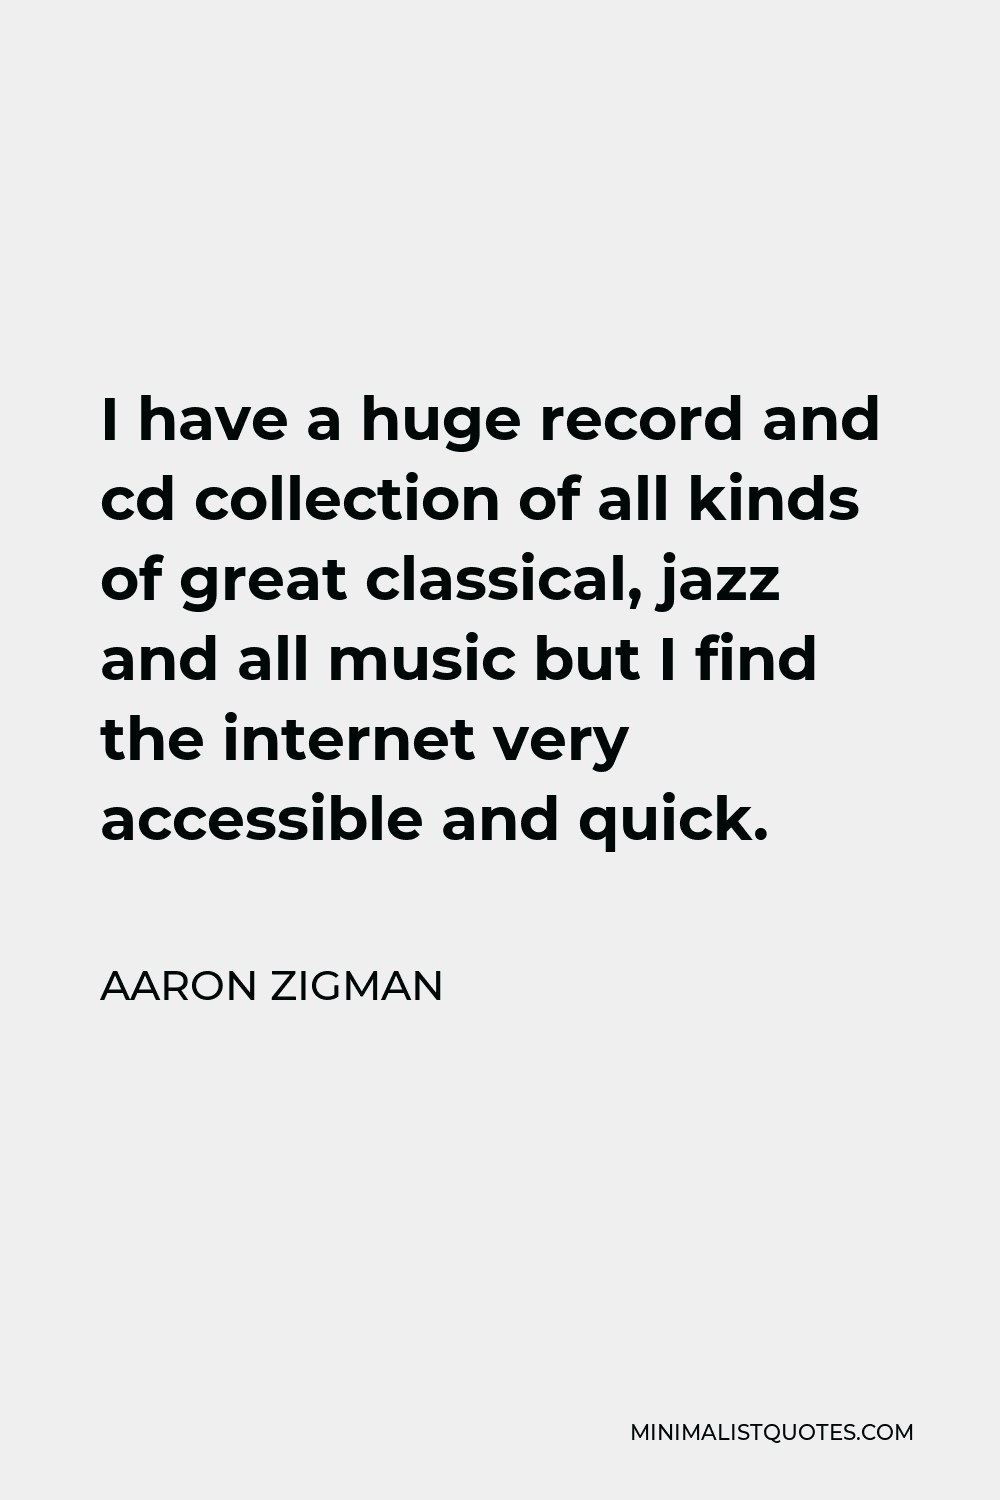 Aaron Zigman Quote - I have a huge record and cd collection of all kinds of great classical, jazz and all music but I find the internet very accessible and quick.